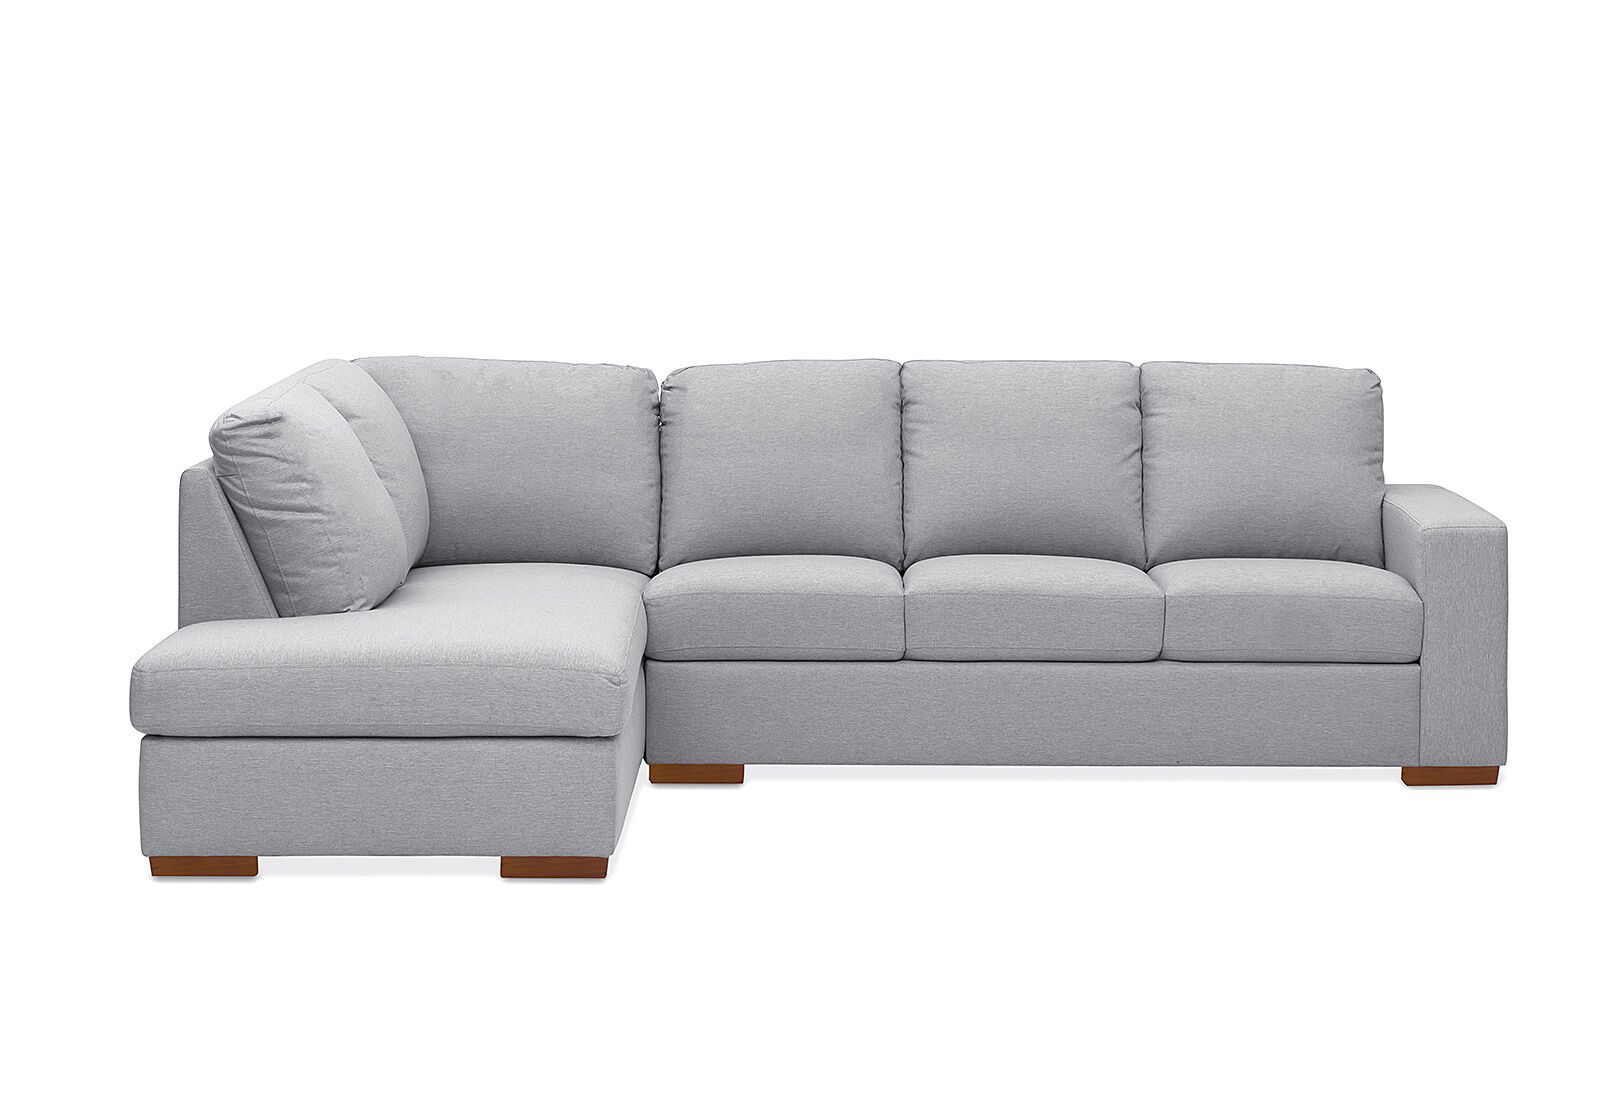 Nixon Fabric 4 Seater Sofa with Left-Hand Facing Chaise